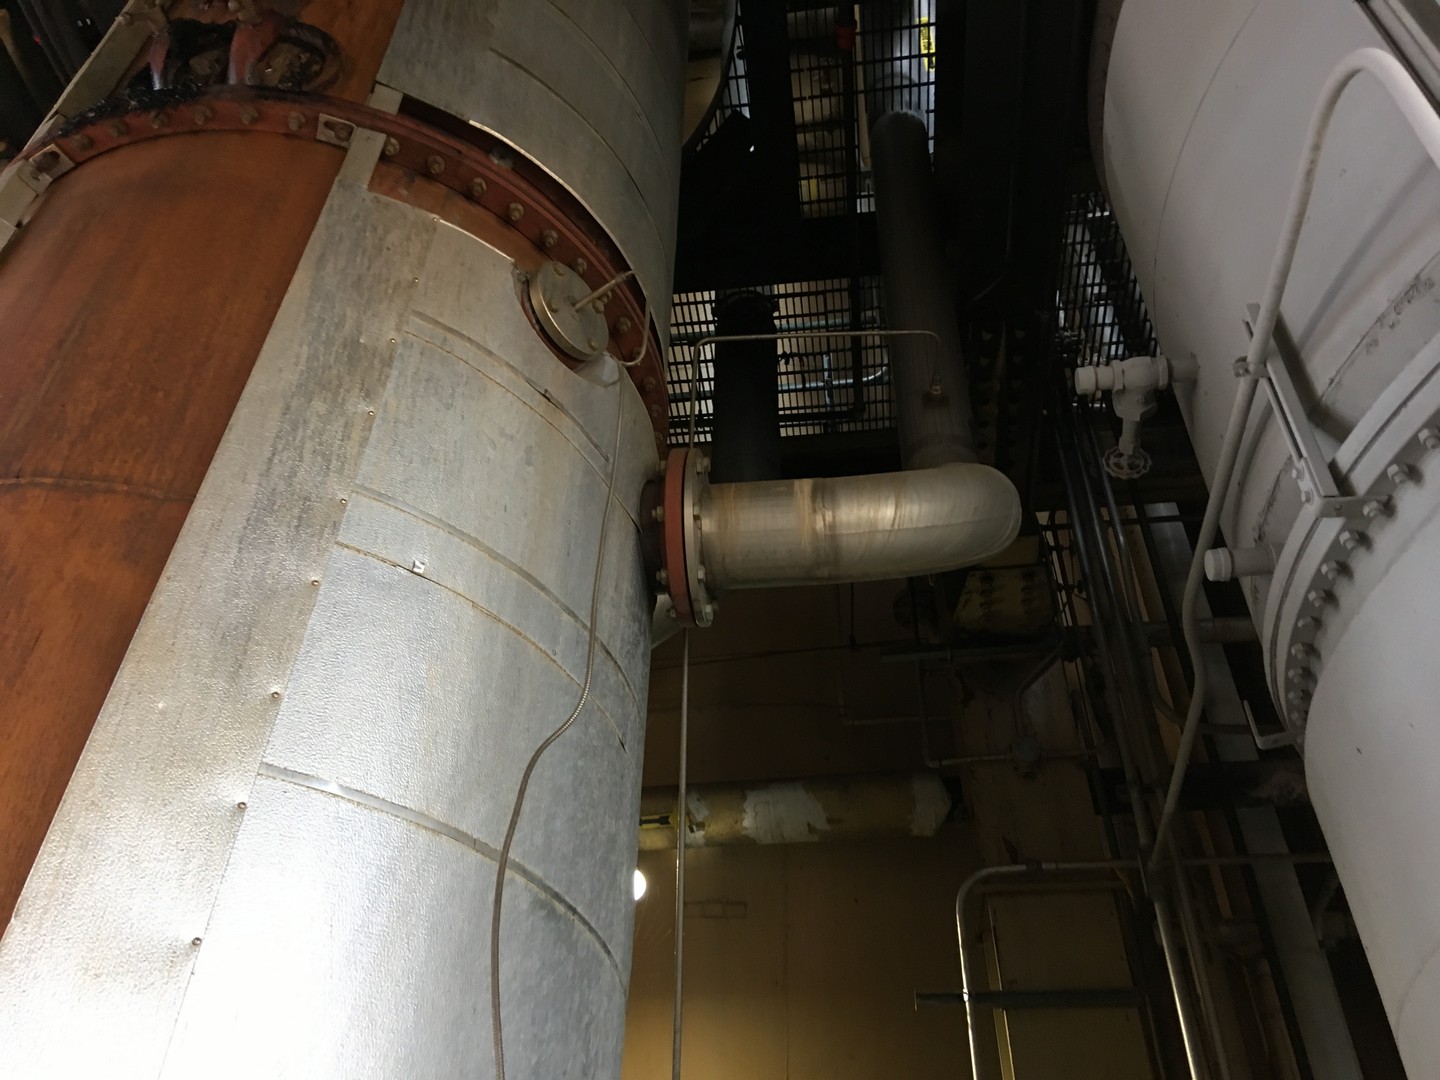 One of two continuous stills. It is HUGE - 60 feet high and look at the diameter!